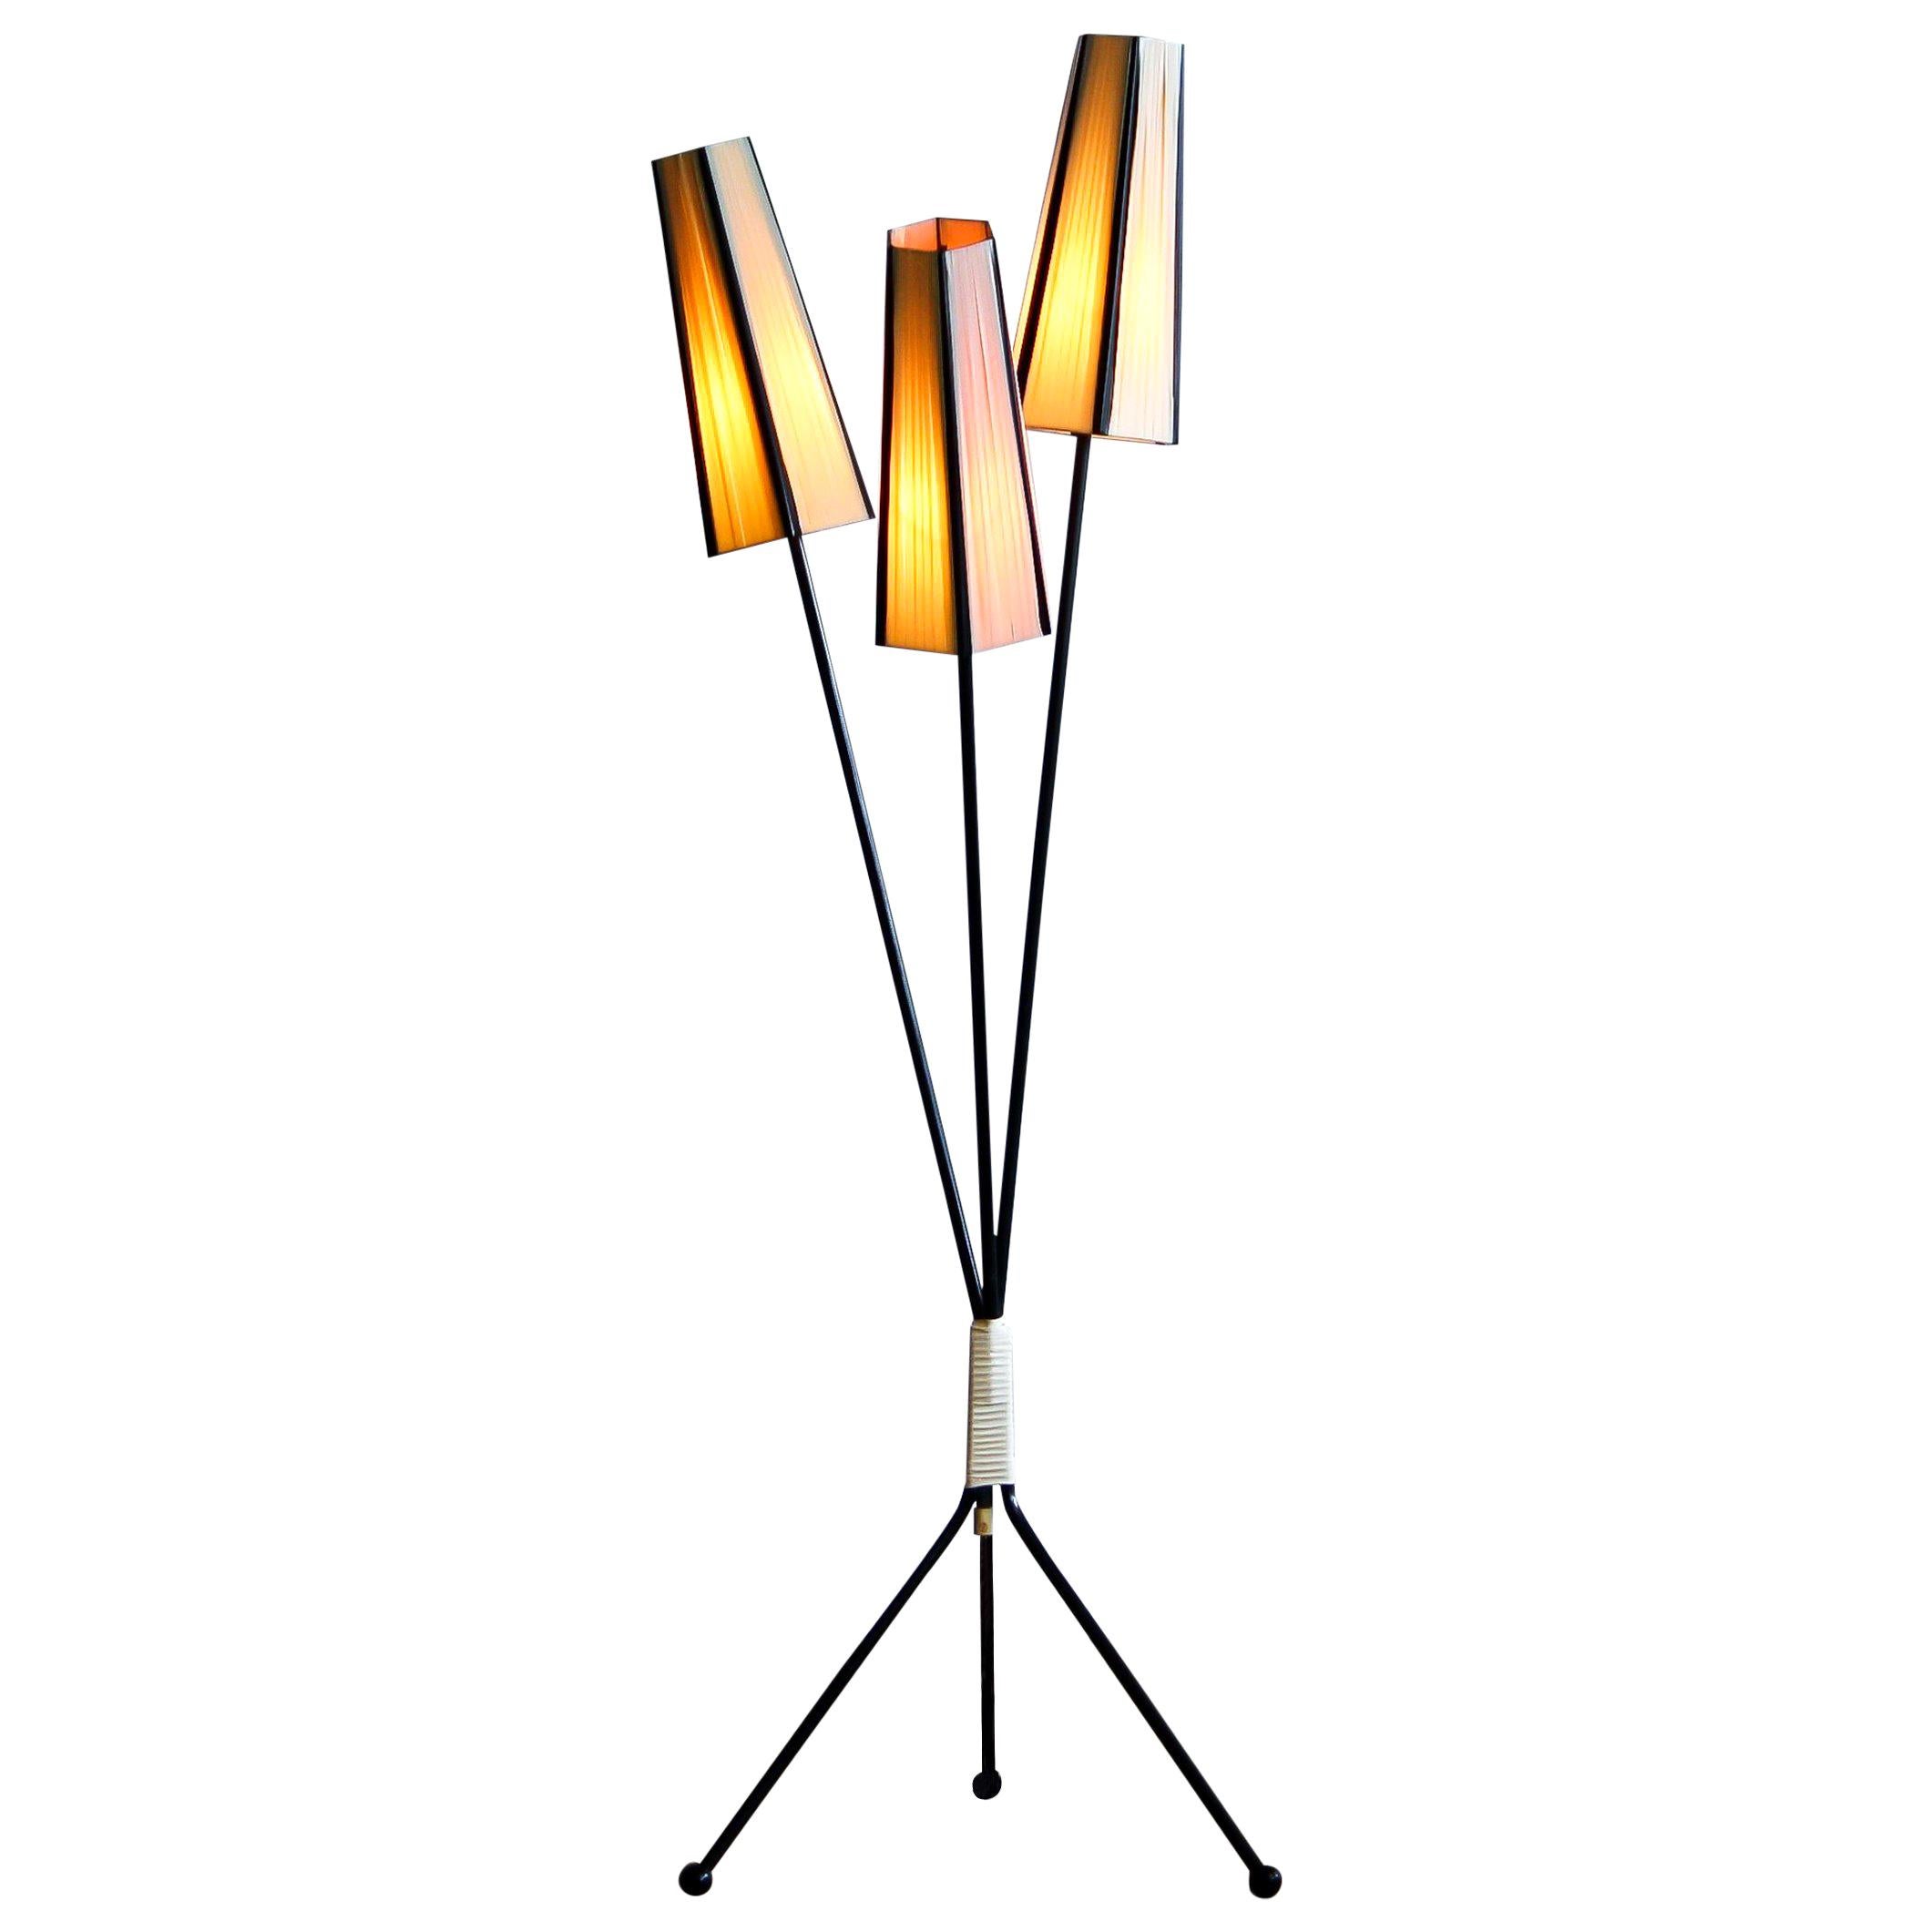 Floor lamp with two off-white and one salmon polyester fabrics covers from the 1950s.
The caps are lined with black cords.
The lamp stands on a black metal three-leg rest. It is in good condition.
Period 1950s.
Dimensions: H 138 cm, ø 45.